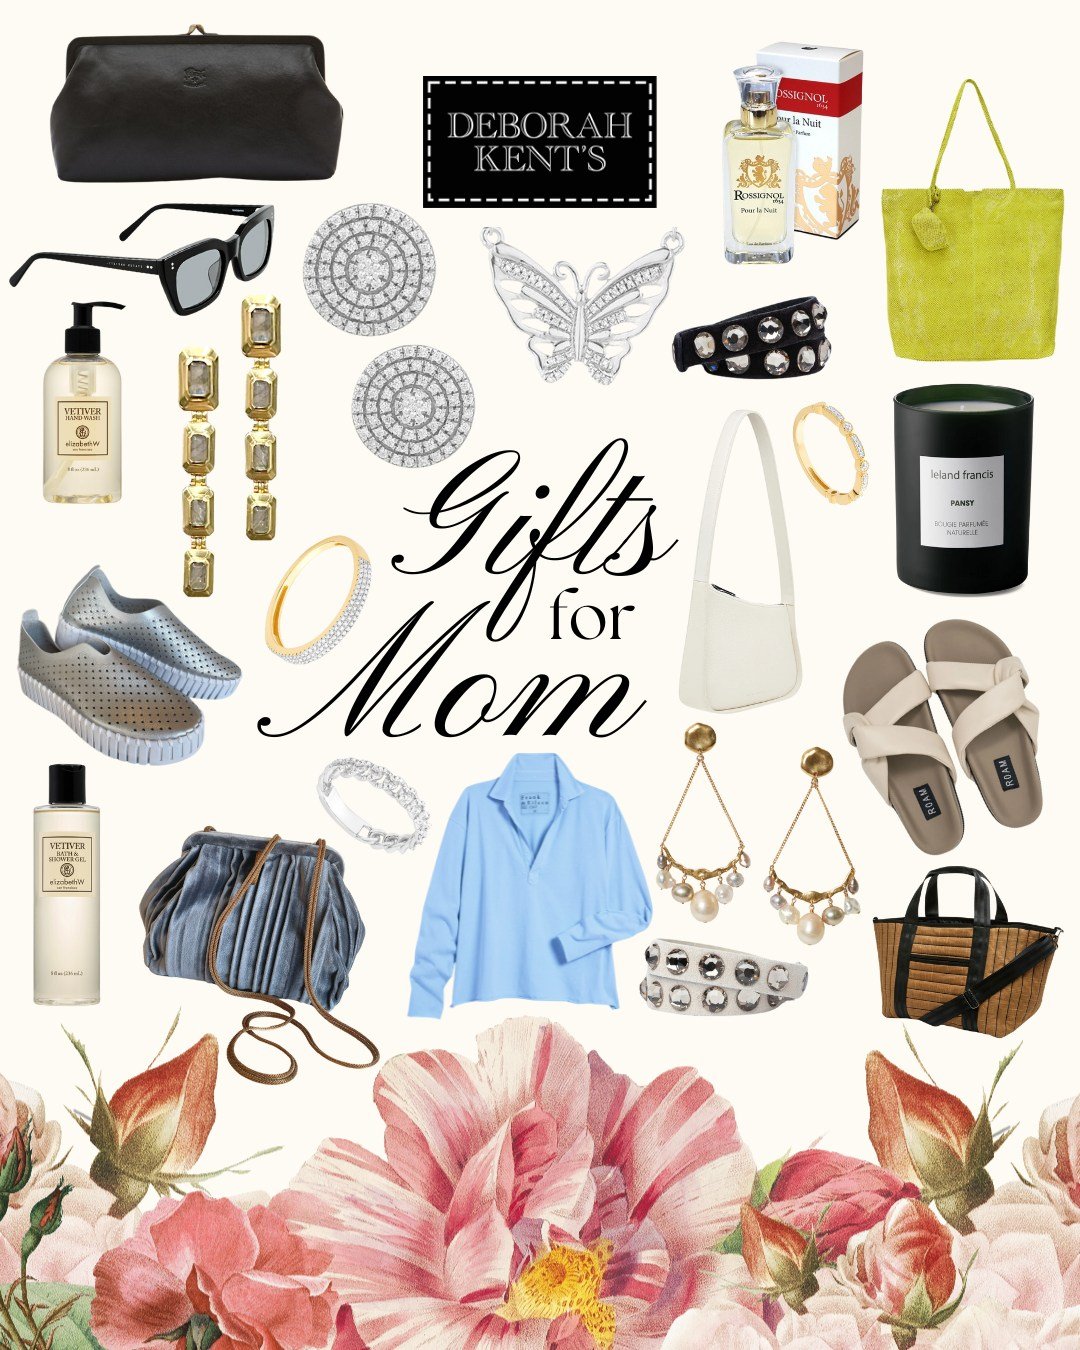 Mom, grandma, mom-to-be, mom-in-law, step-mom - whichever form your motherly figure takes, find something special to treat her at Deborah Kent's in Tampa. Open 'til 5:30 today &amp; tomorrow.

#deborahkents #mothersdaygiftguide #mothersdaygift #happy